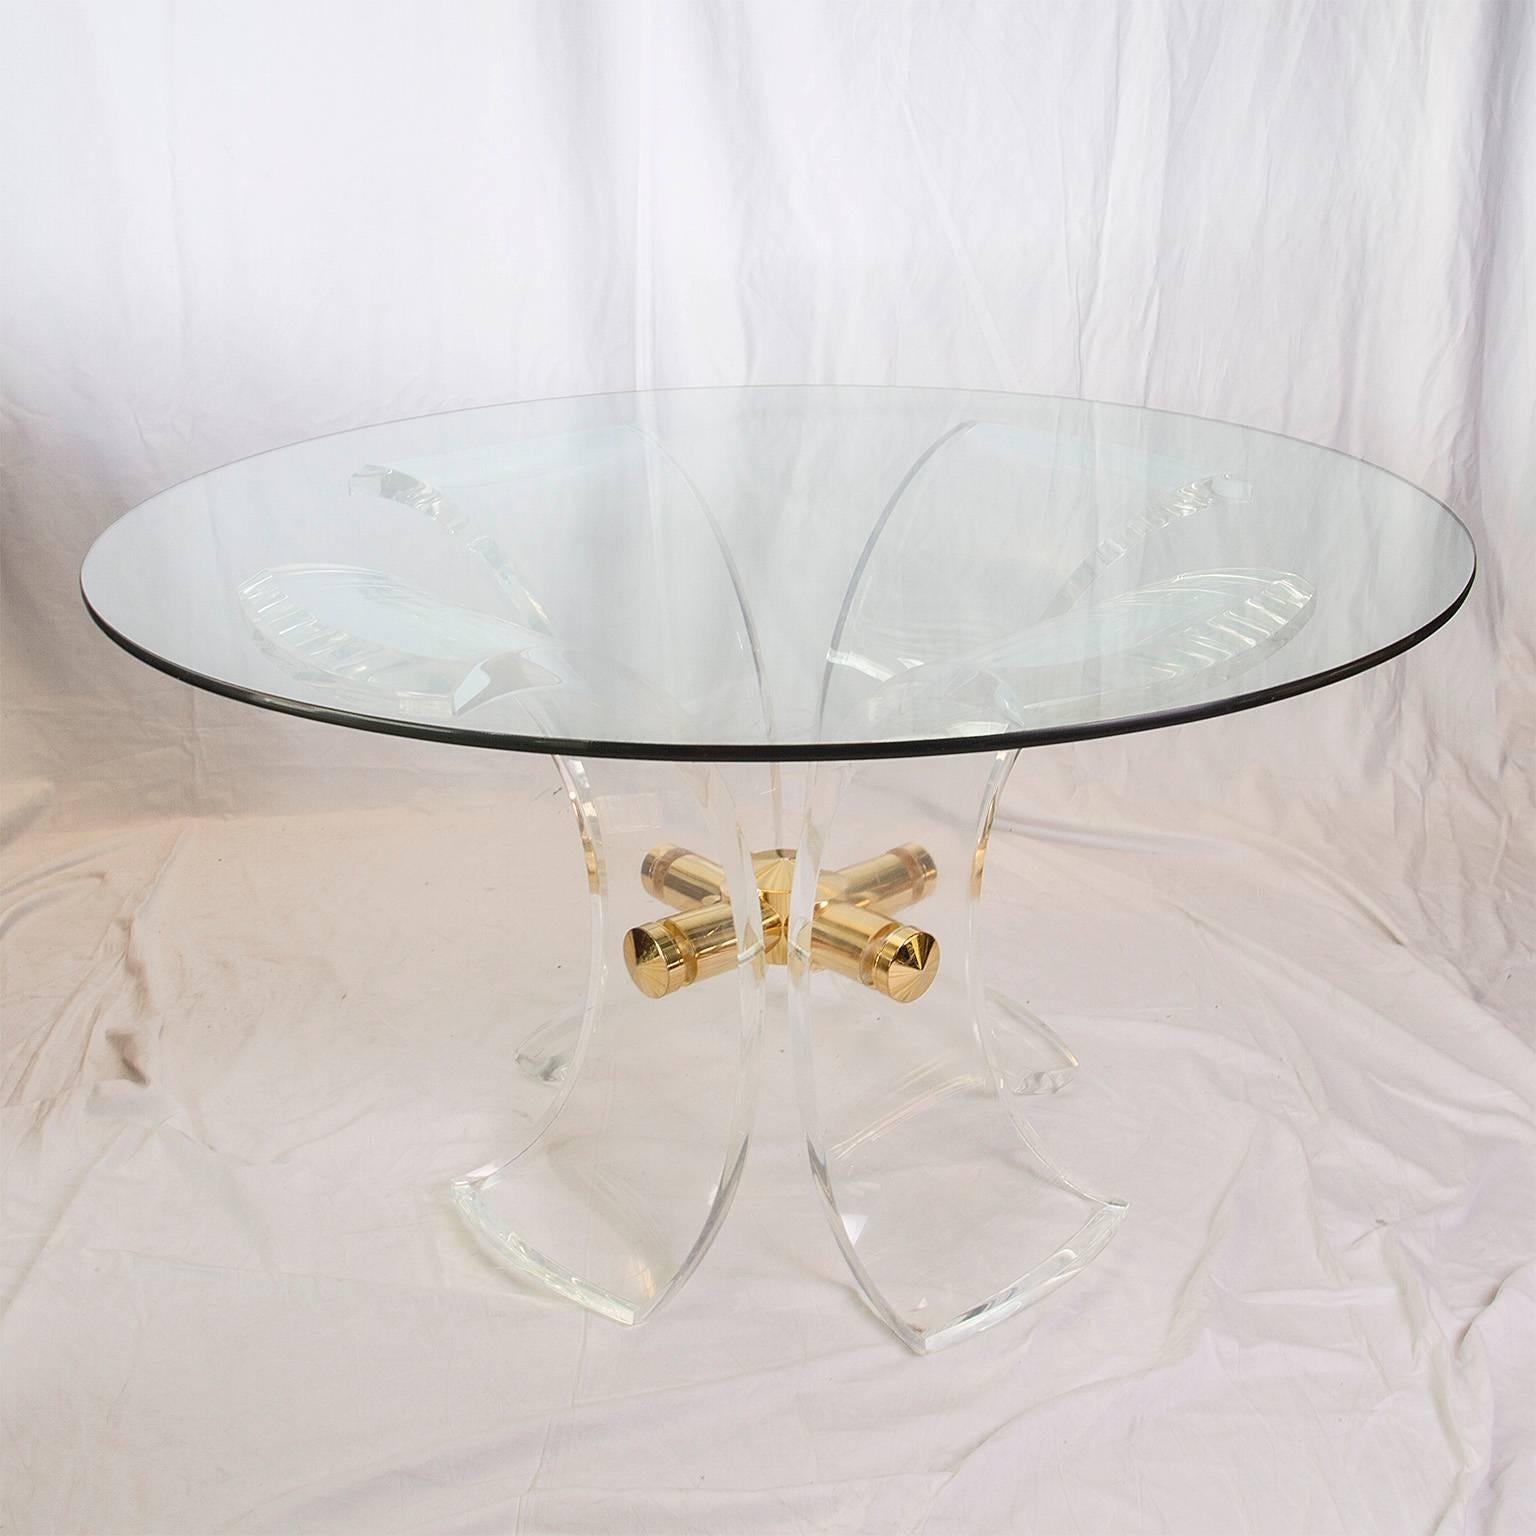 Unique lys Lucite and golden steel dining table with glass top.

Please contact us for delivery details.